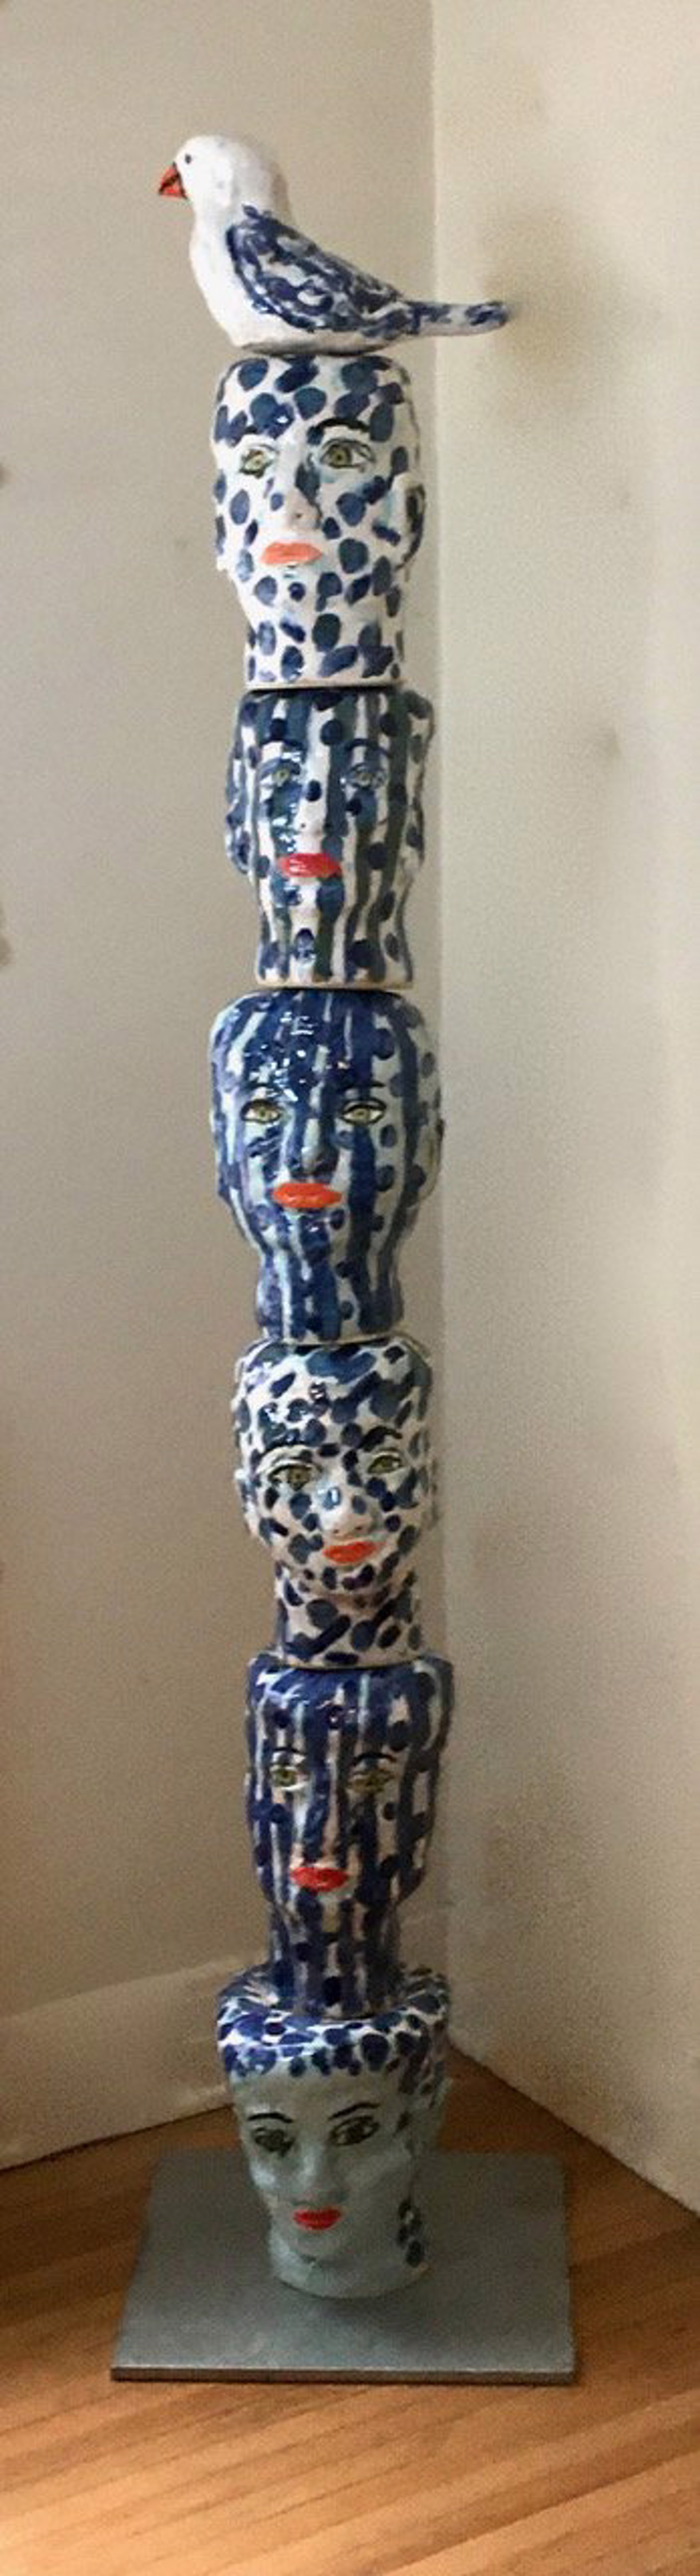 Blue Head Totem by Linda Smith